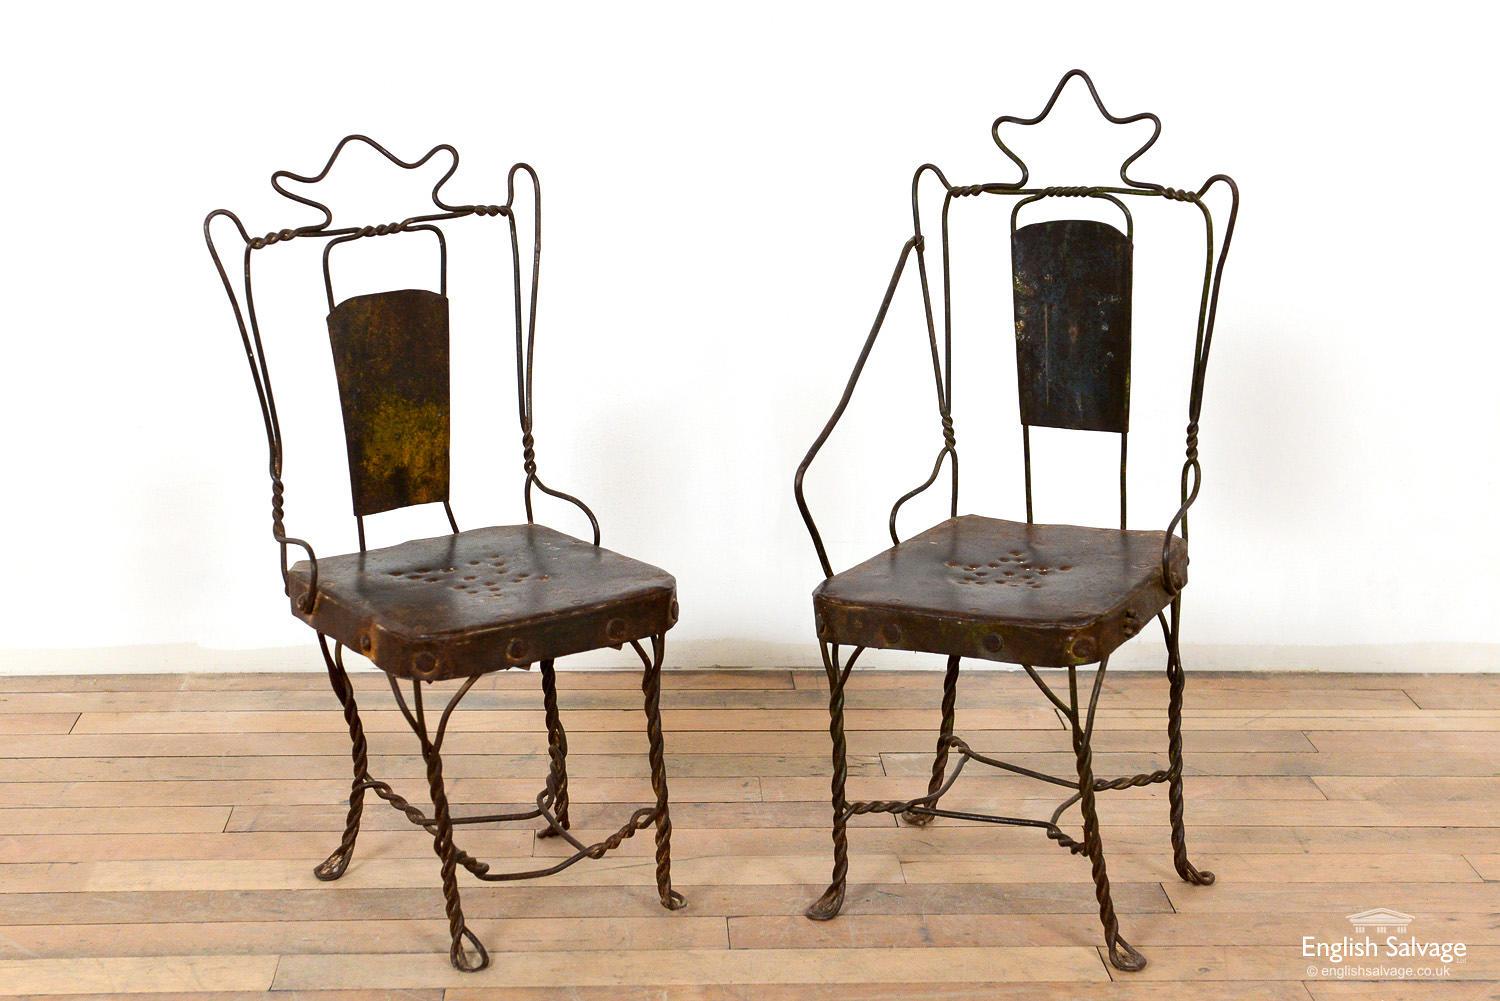 Very sweet small chairs naively made with recycled metal. These would make lovely decorative or display items.